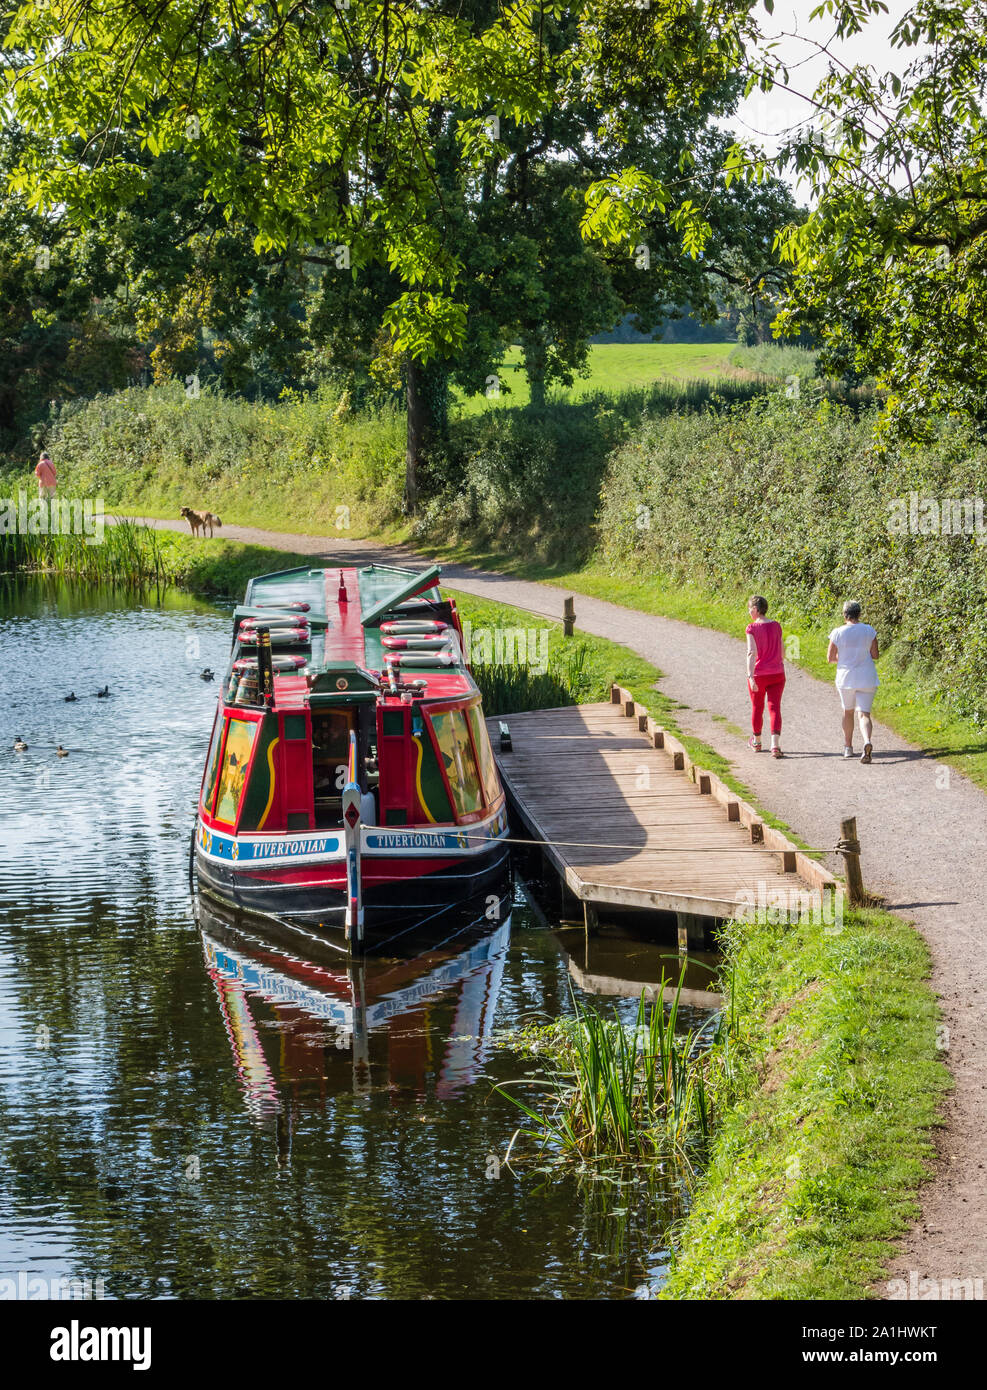 Tiverton Canal Company Barge, Tivertonian, moored on the Grand Western Canal at East Manley, with two females walking by on the towpath, Devon, UK. Stock Photo